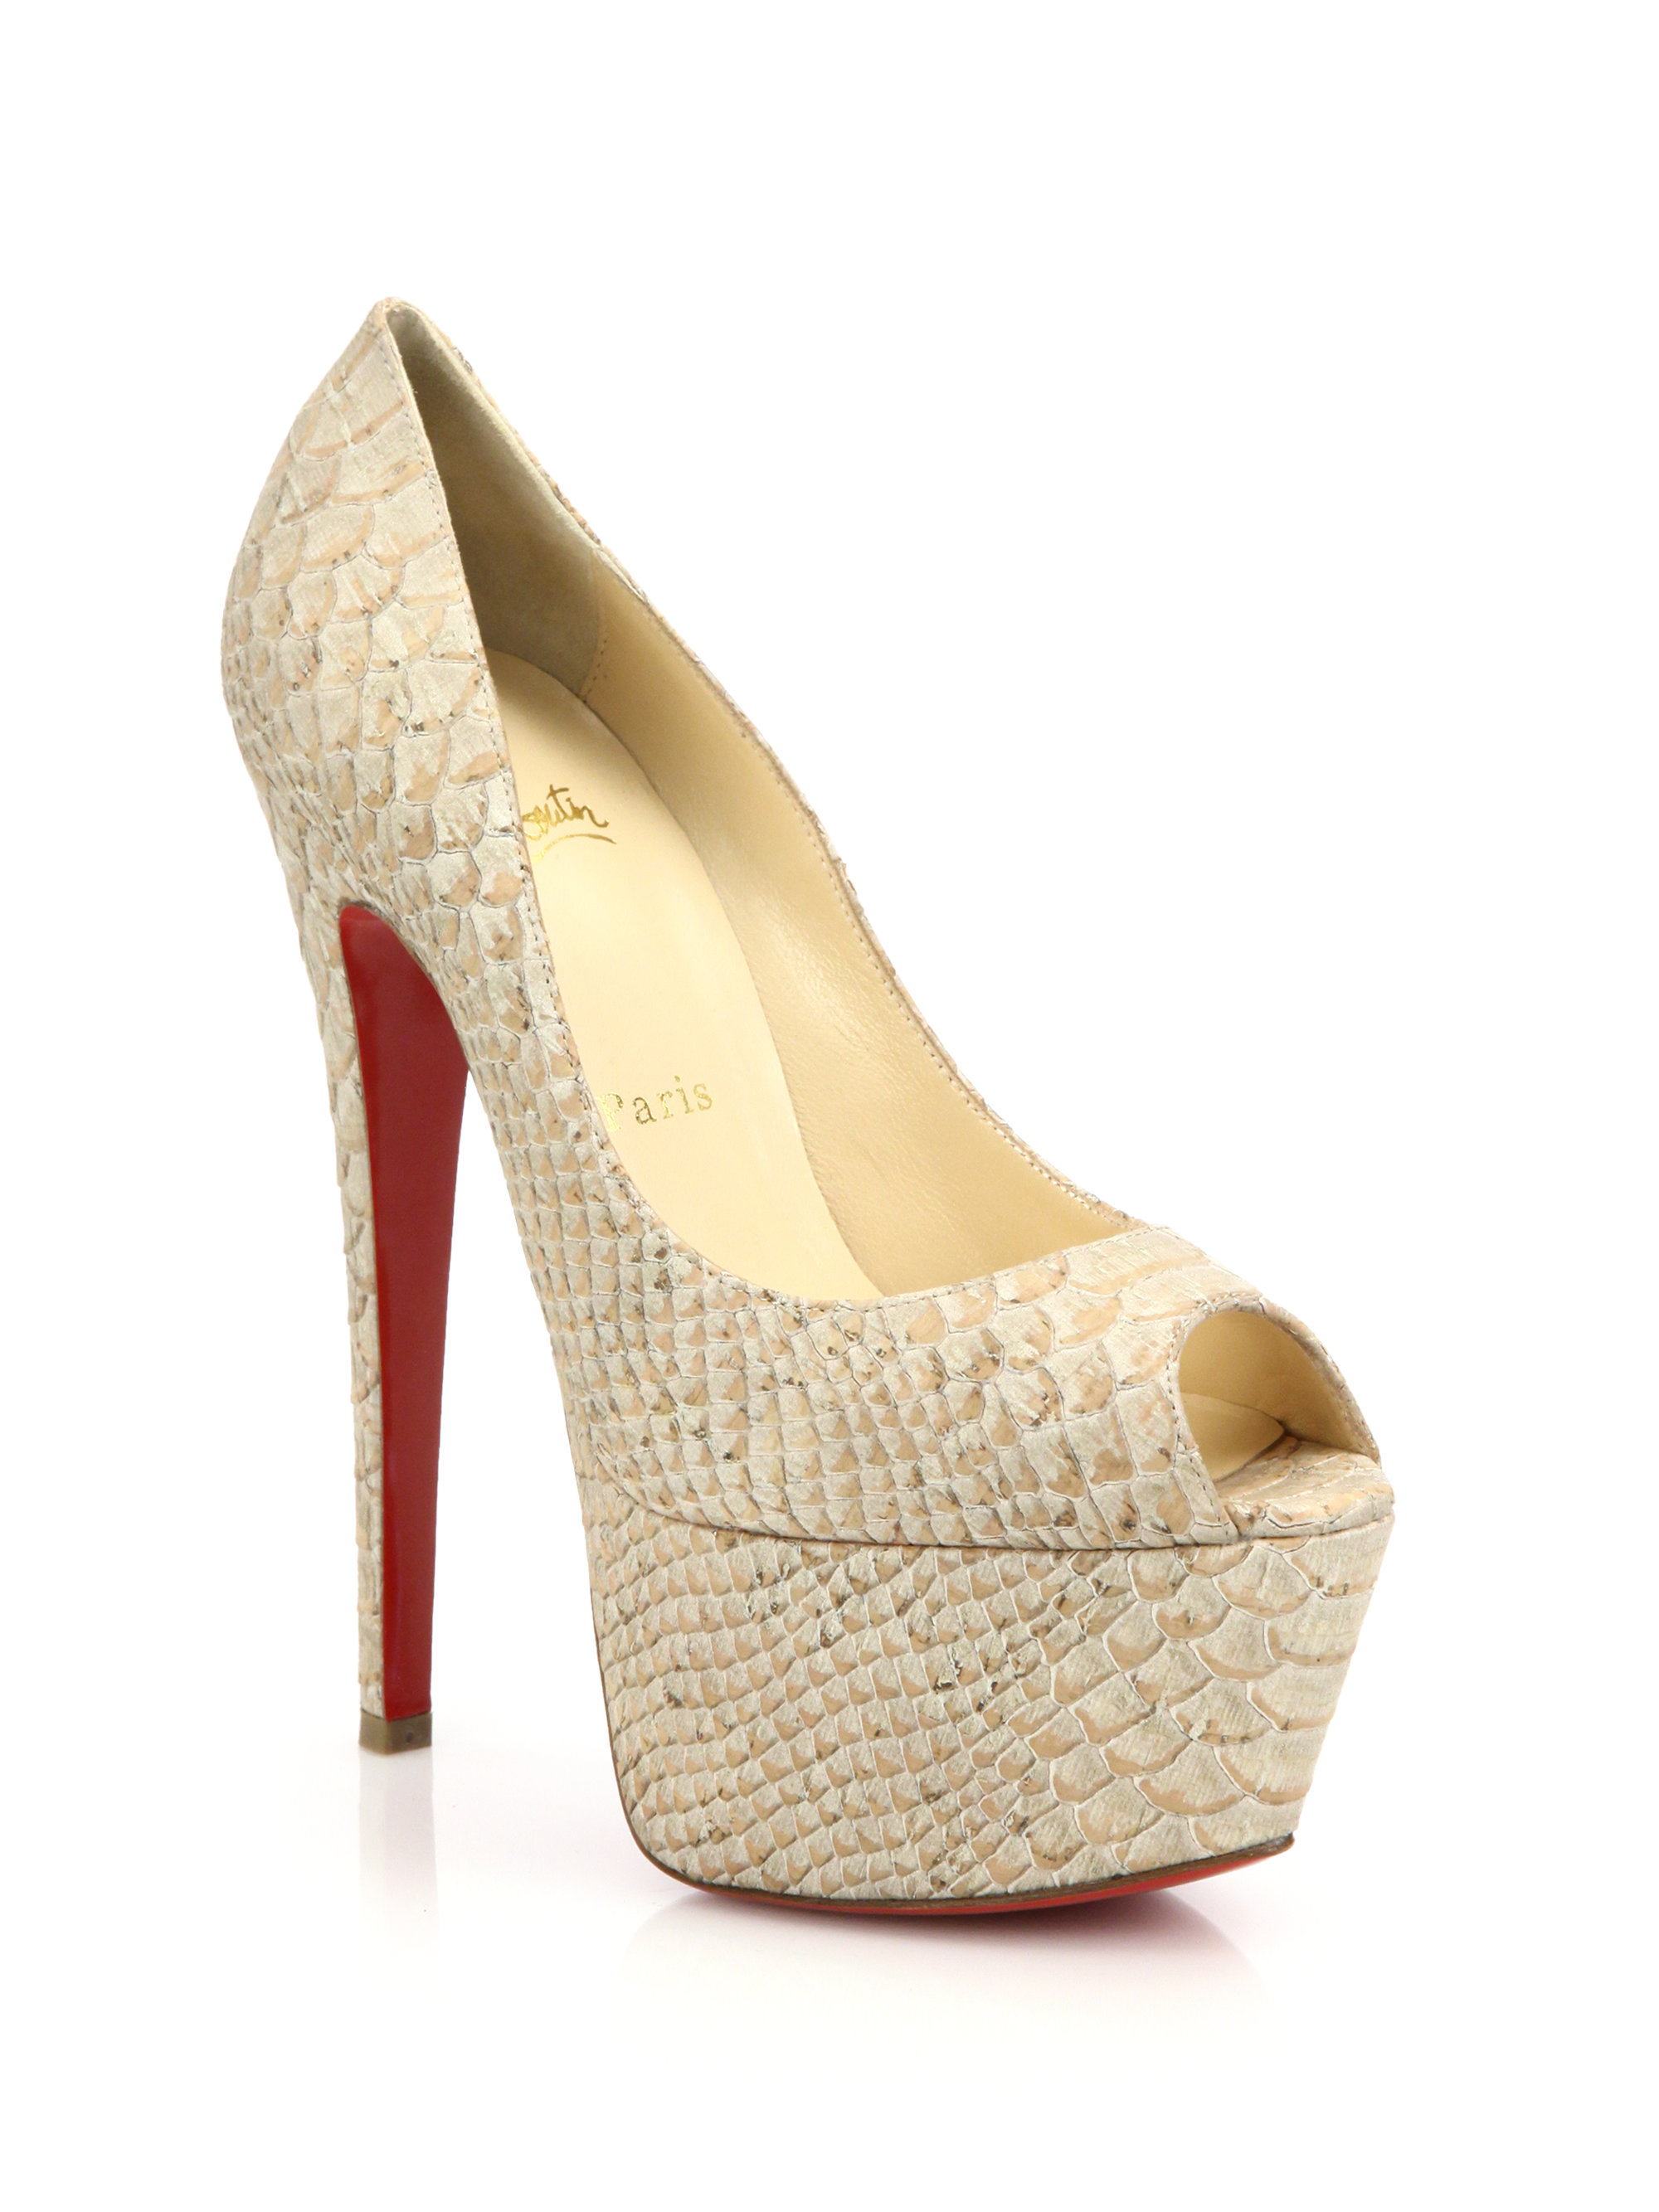 christian louboutin peep-toe wedges White and grey embossed ...